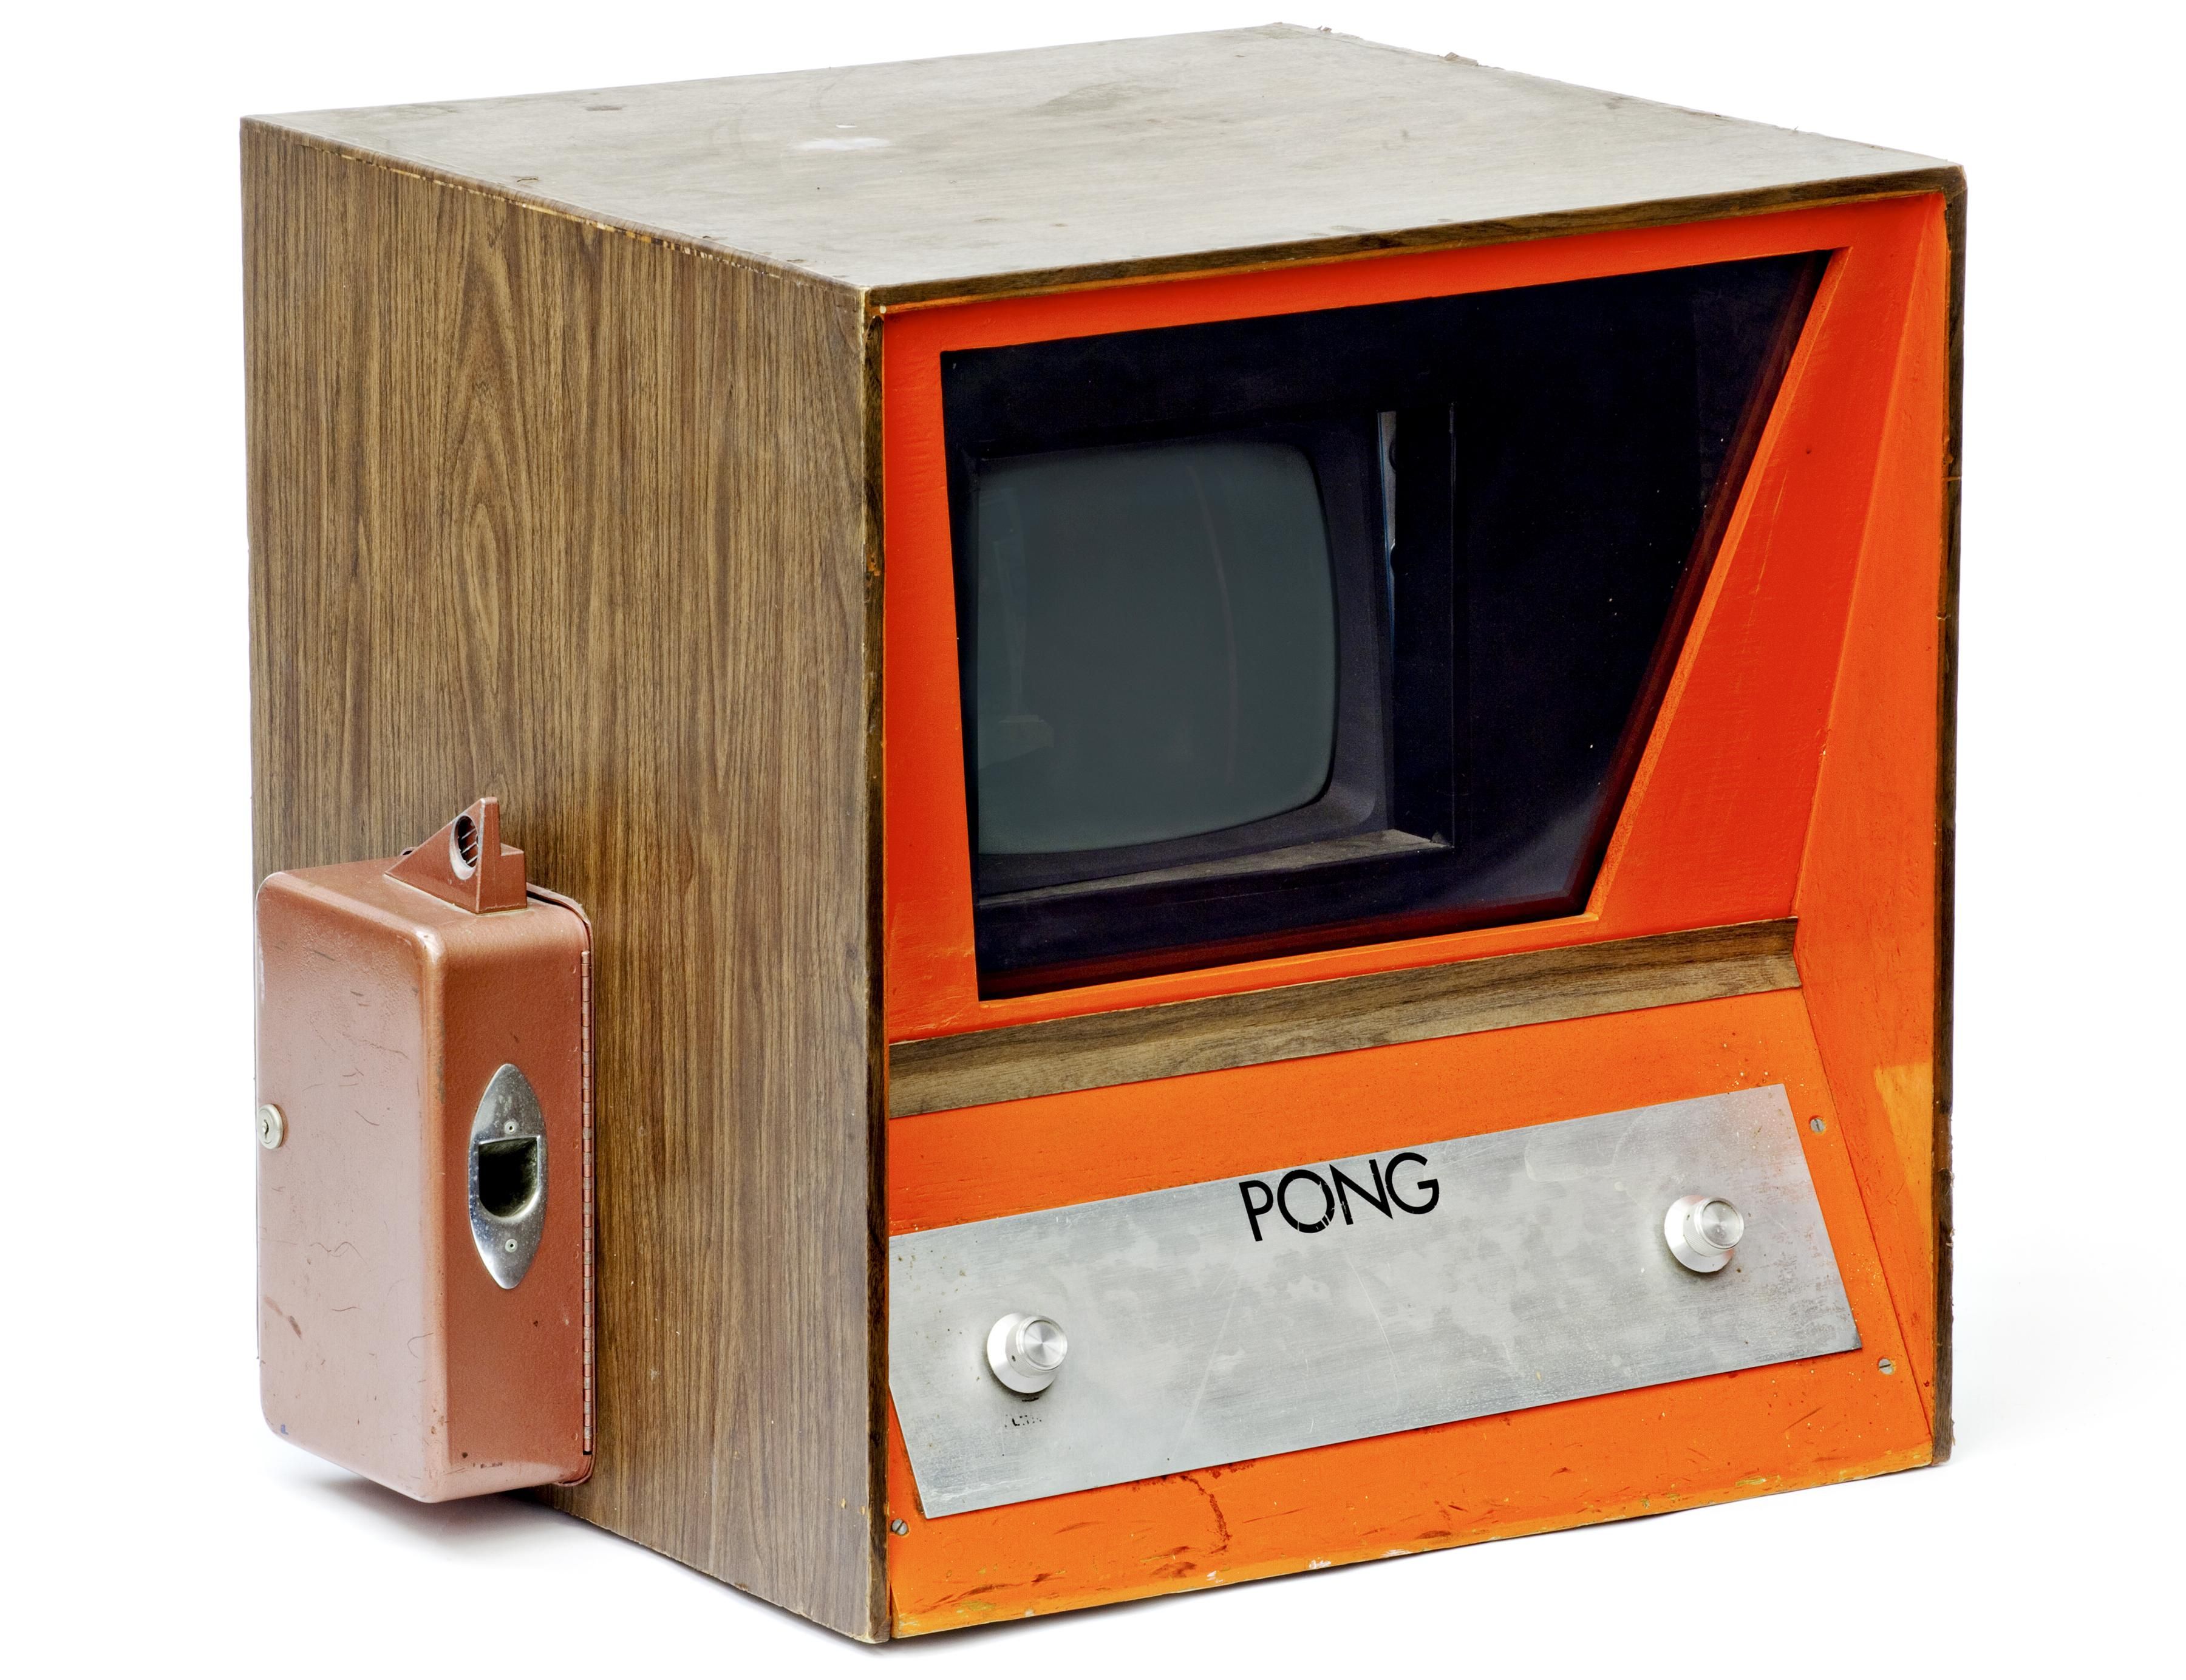 less-than-p-greater-than-this-coin-operated-less-than-em-greater-than-pong-less-than-em-greater-than-prototype-proved-wildly-popular-when-it-debuted-in-november-1972-less-than-p-greater-than.jpg